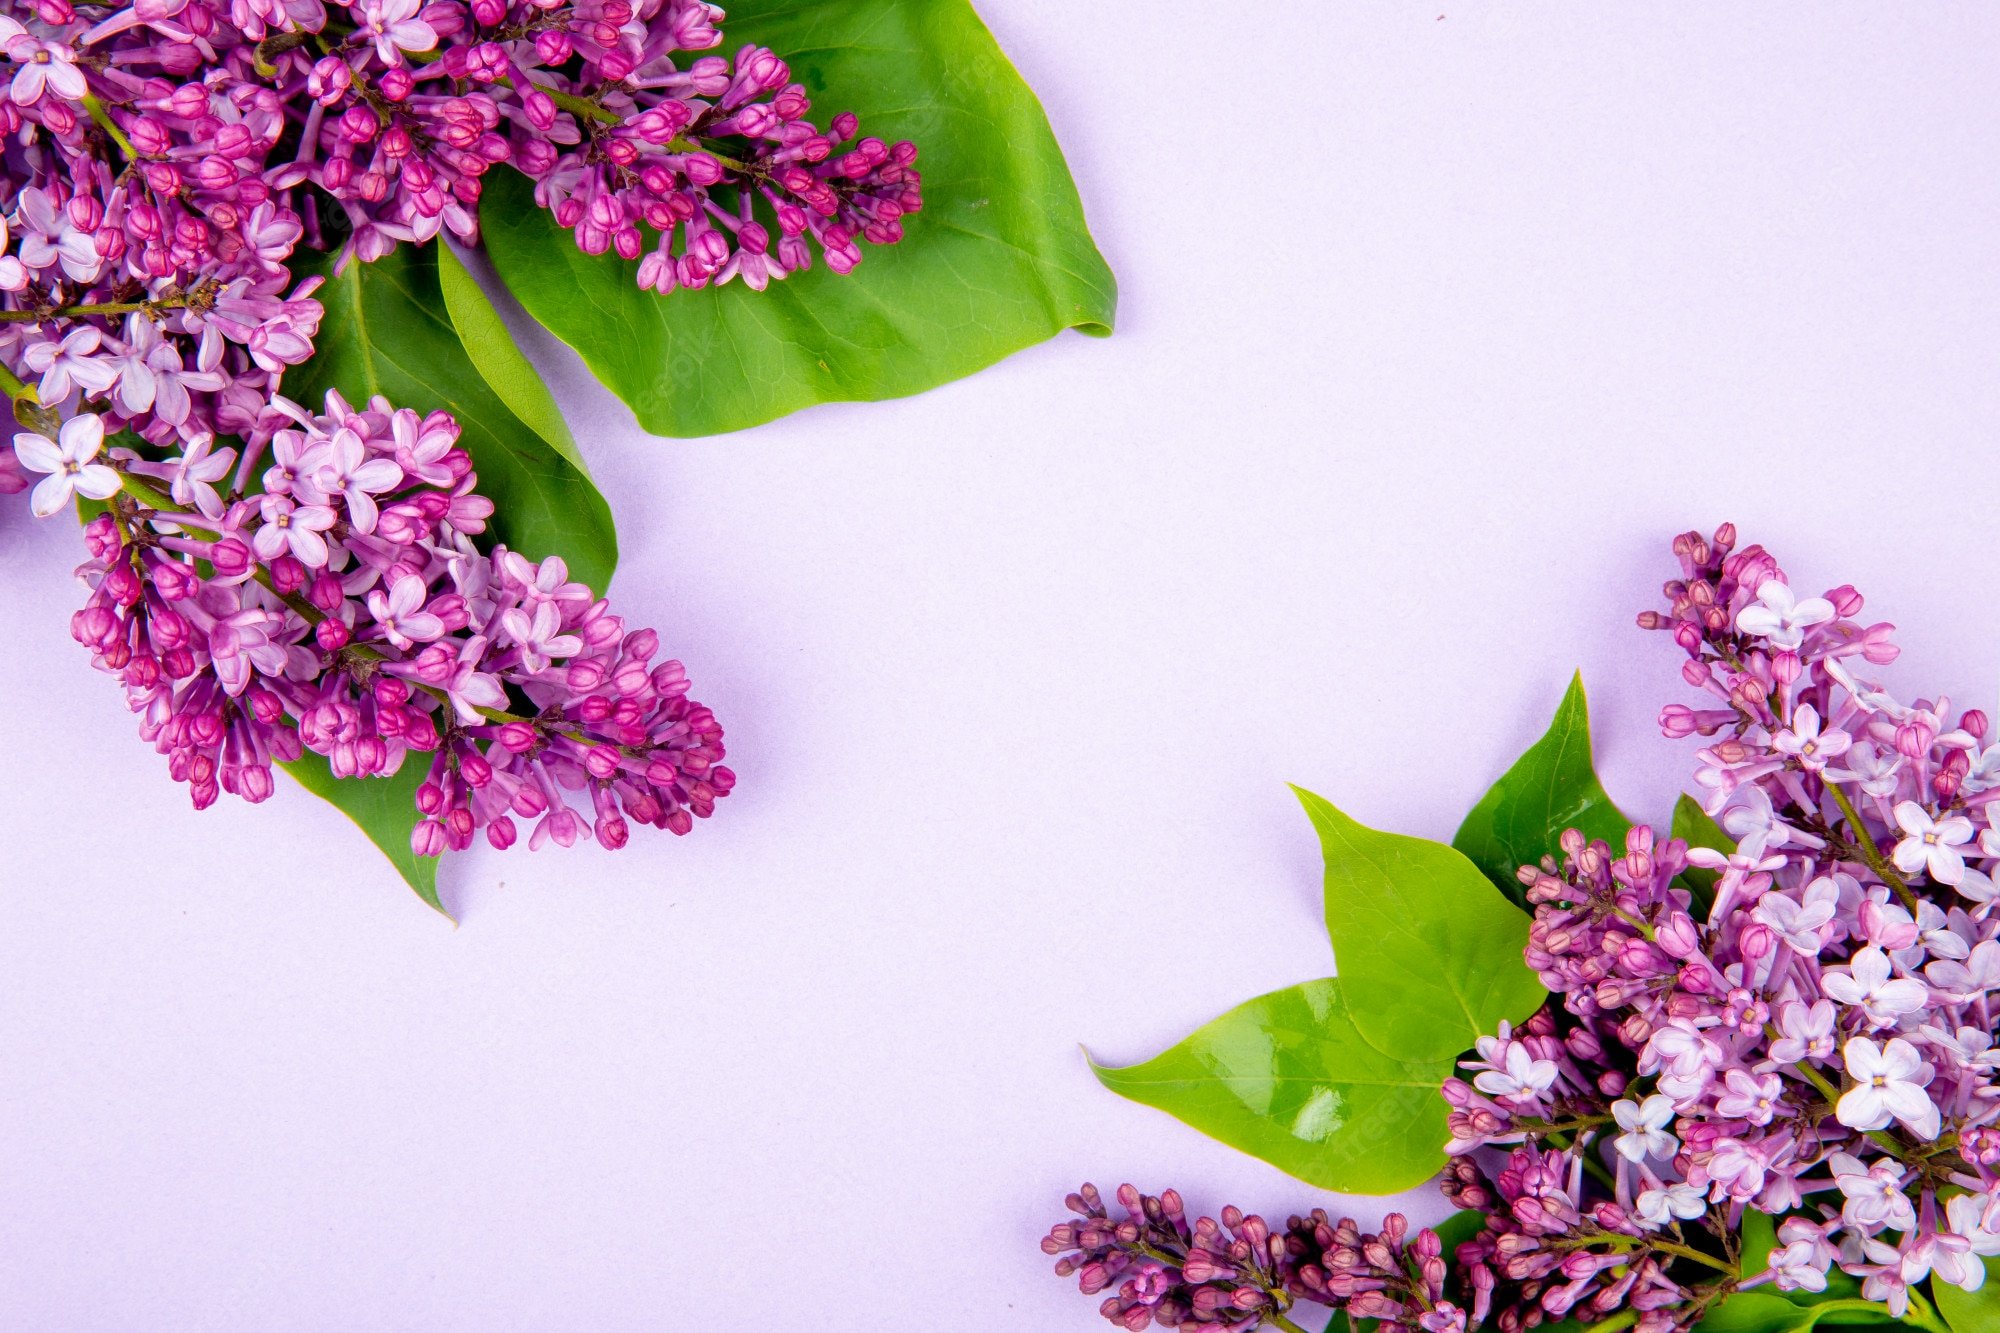 Lilac flower background Image. Free Vectors, & PSD